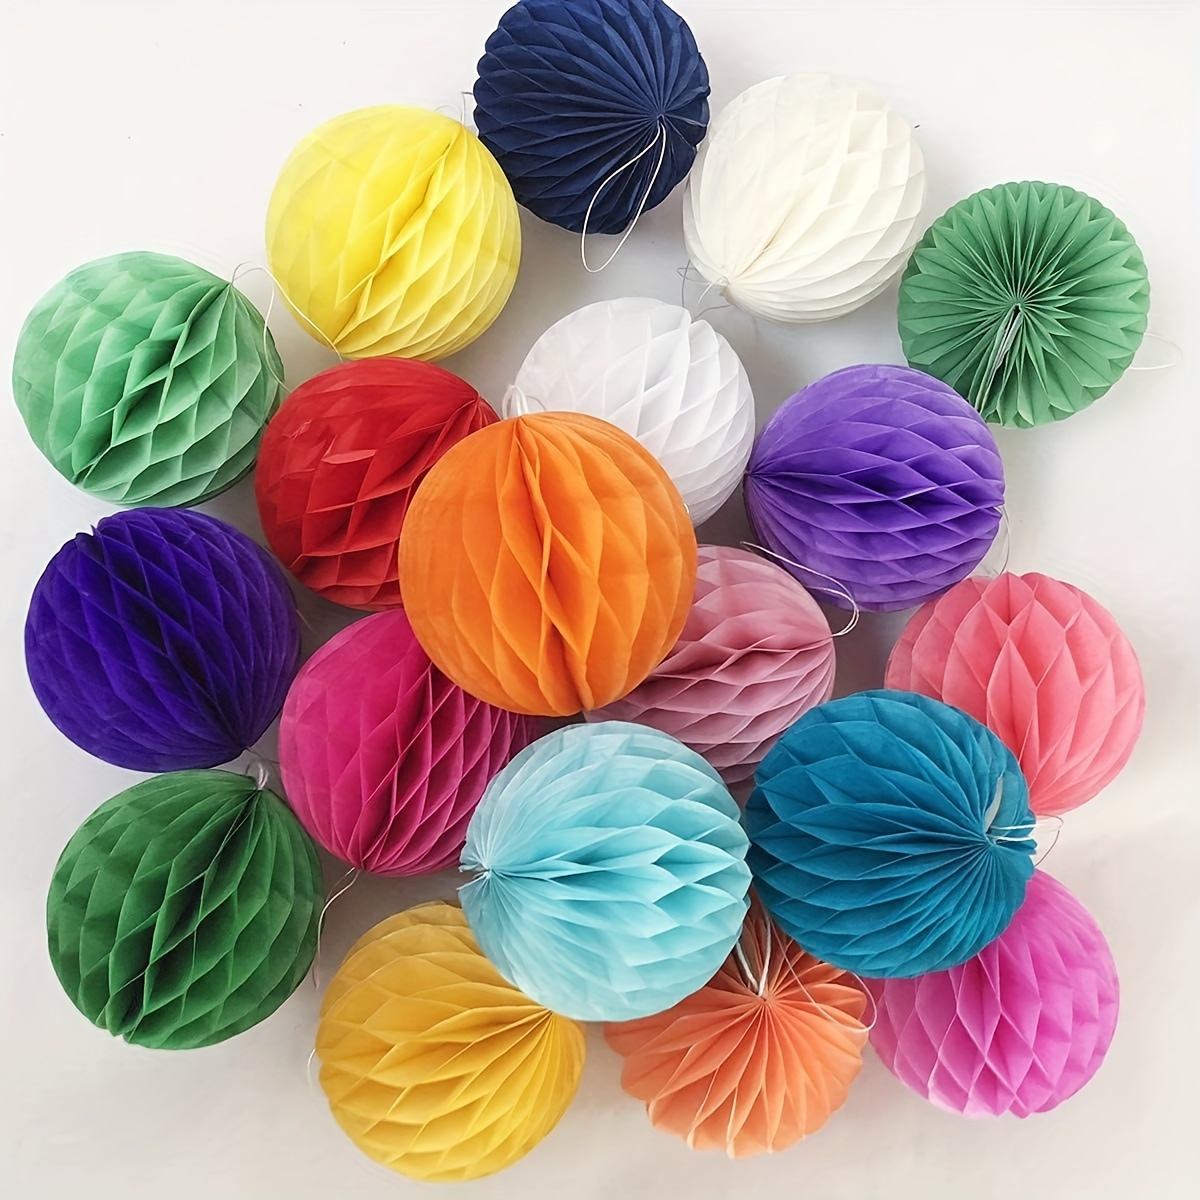 

10pcs Honeycomb Flower Balls - 4inch Tissue Paper Pom Poms Decoration For Birthday, Wedding, Home Decor - Assorted Colors